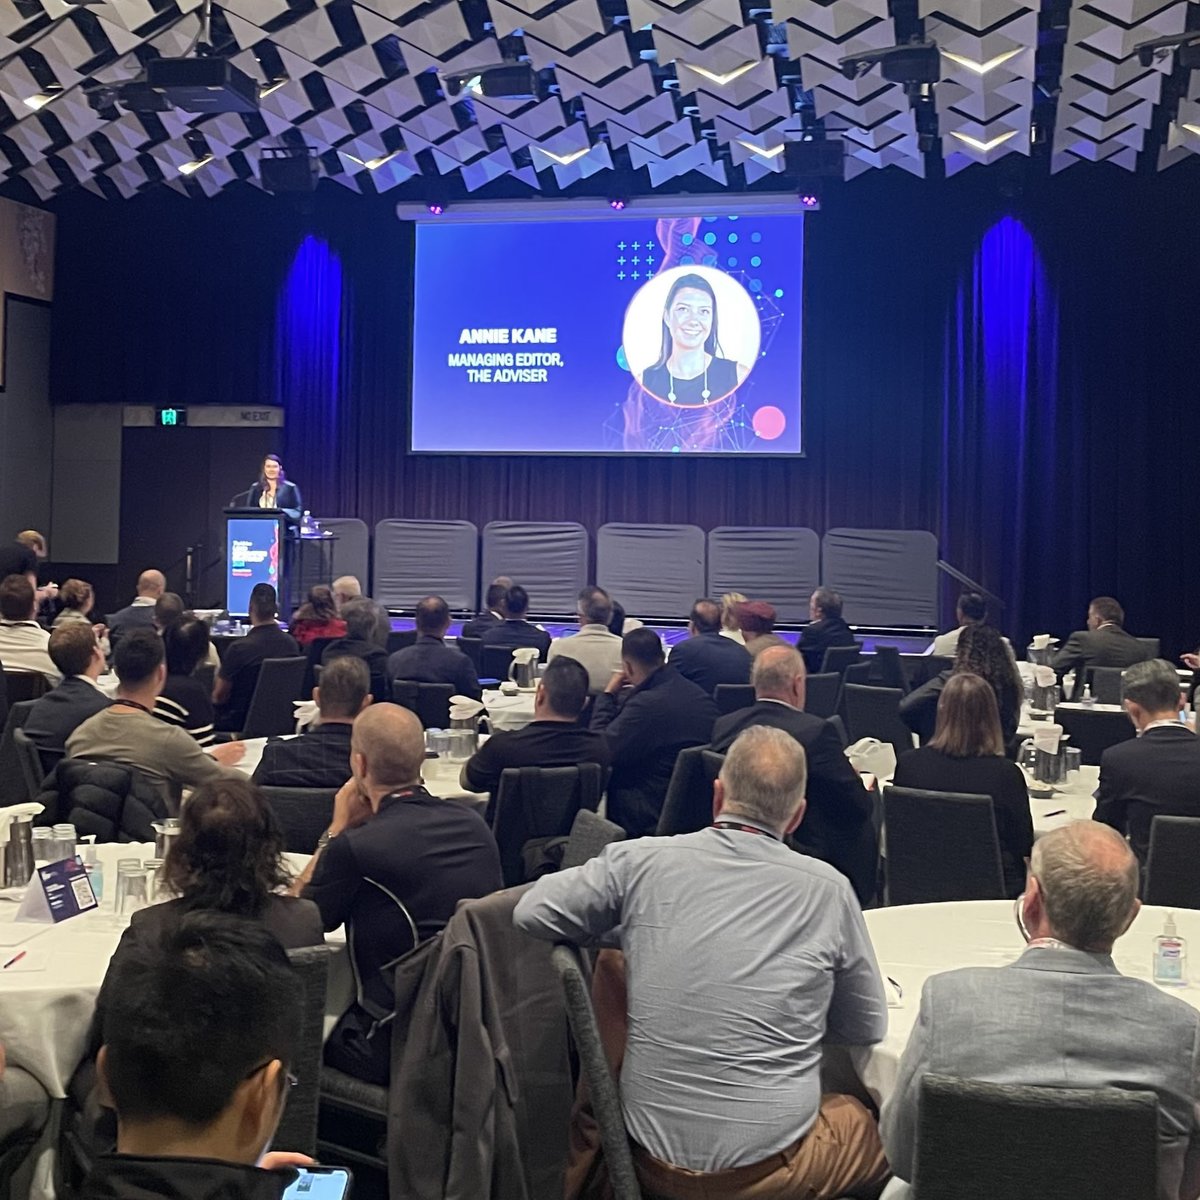 The Lead Gen Summit in Melbourne is in full swing with a fantastic turnout!
A huge thank you to everyone who came out today! We can't wait to hear all the valuable takeaways you've gained.

#LeadGenSummit #leadgeneration #leads #broker #mortgage #marketing #insights #strategies